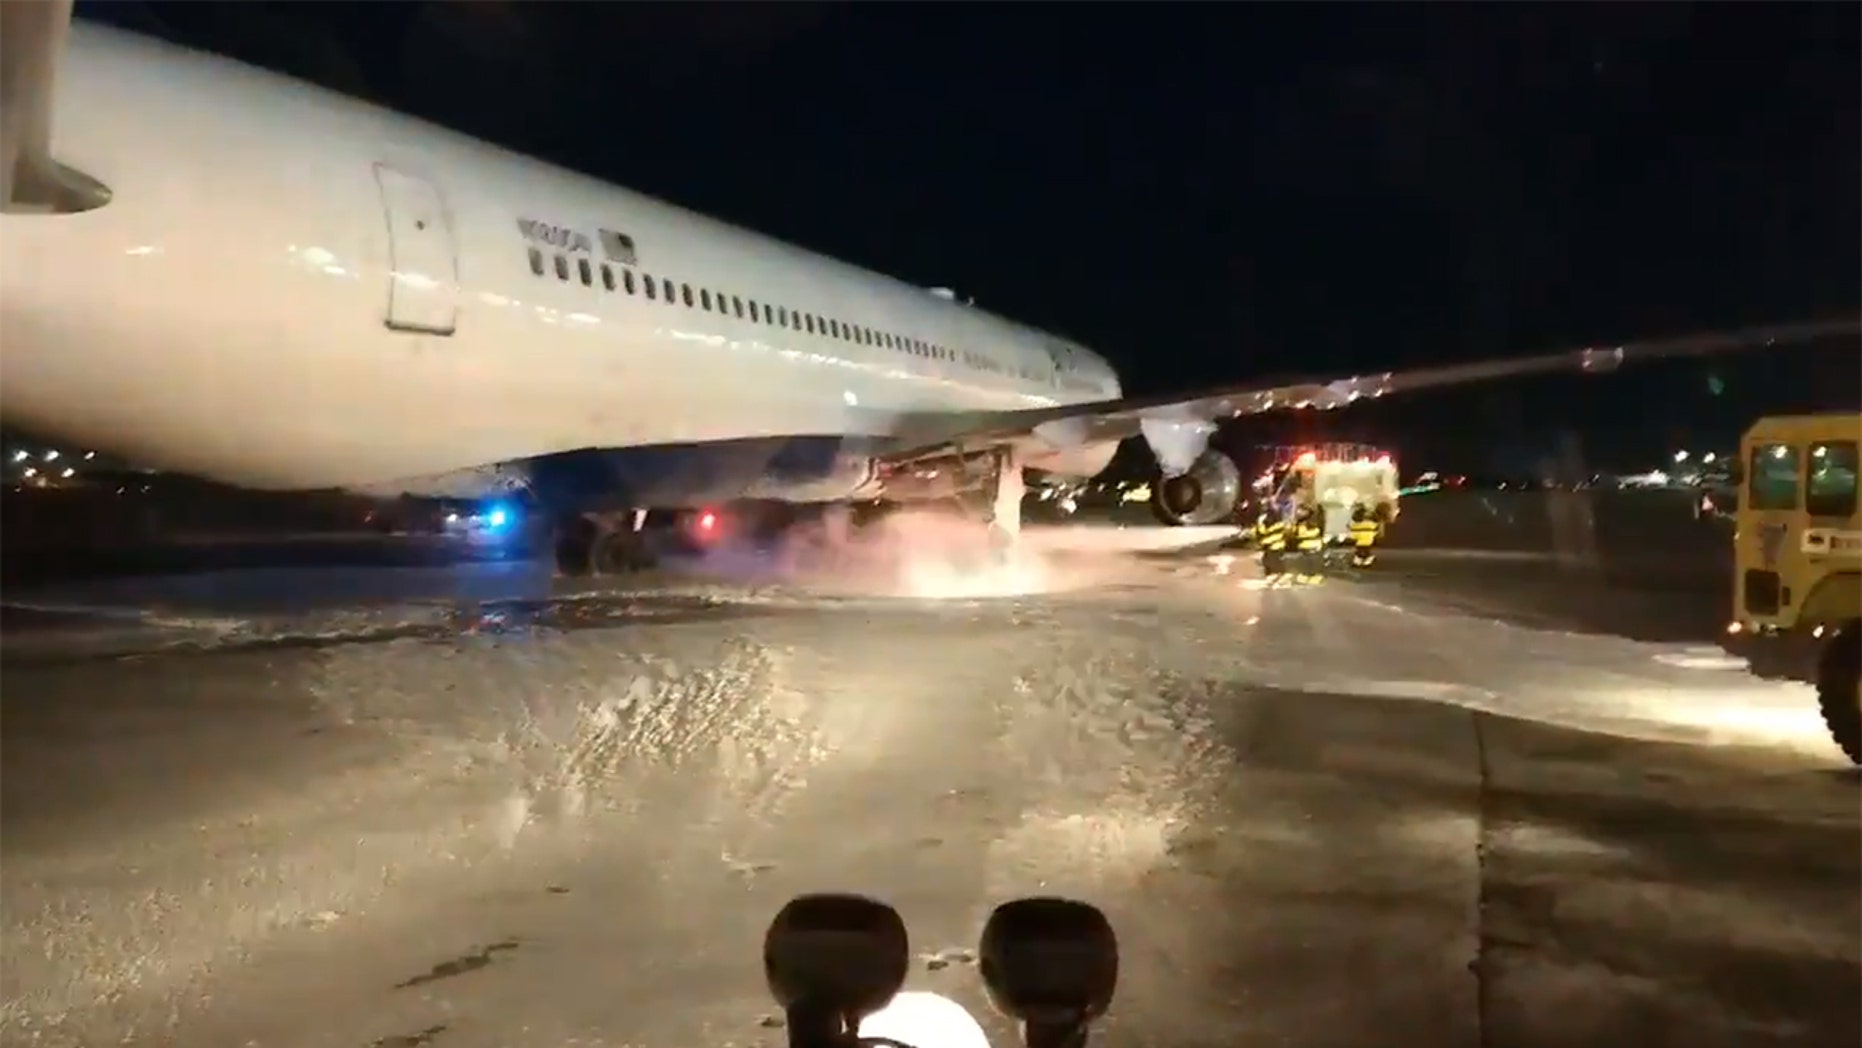 The flames were extinguished on the taxiway, confirmed the authorities of the port authority.